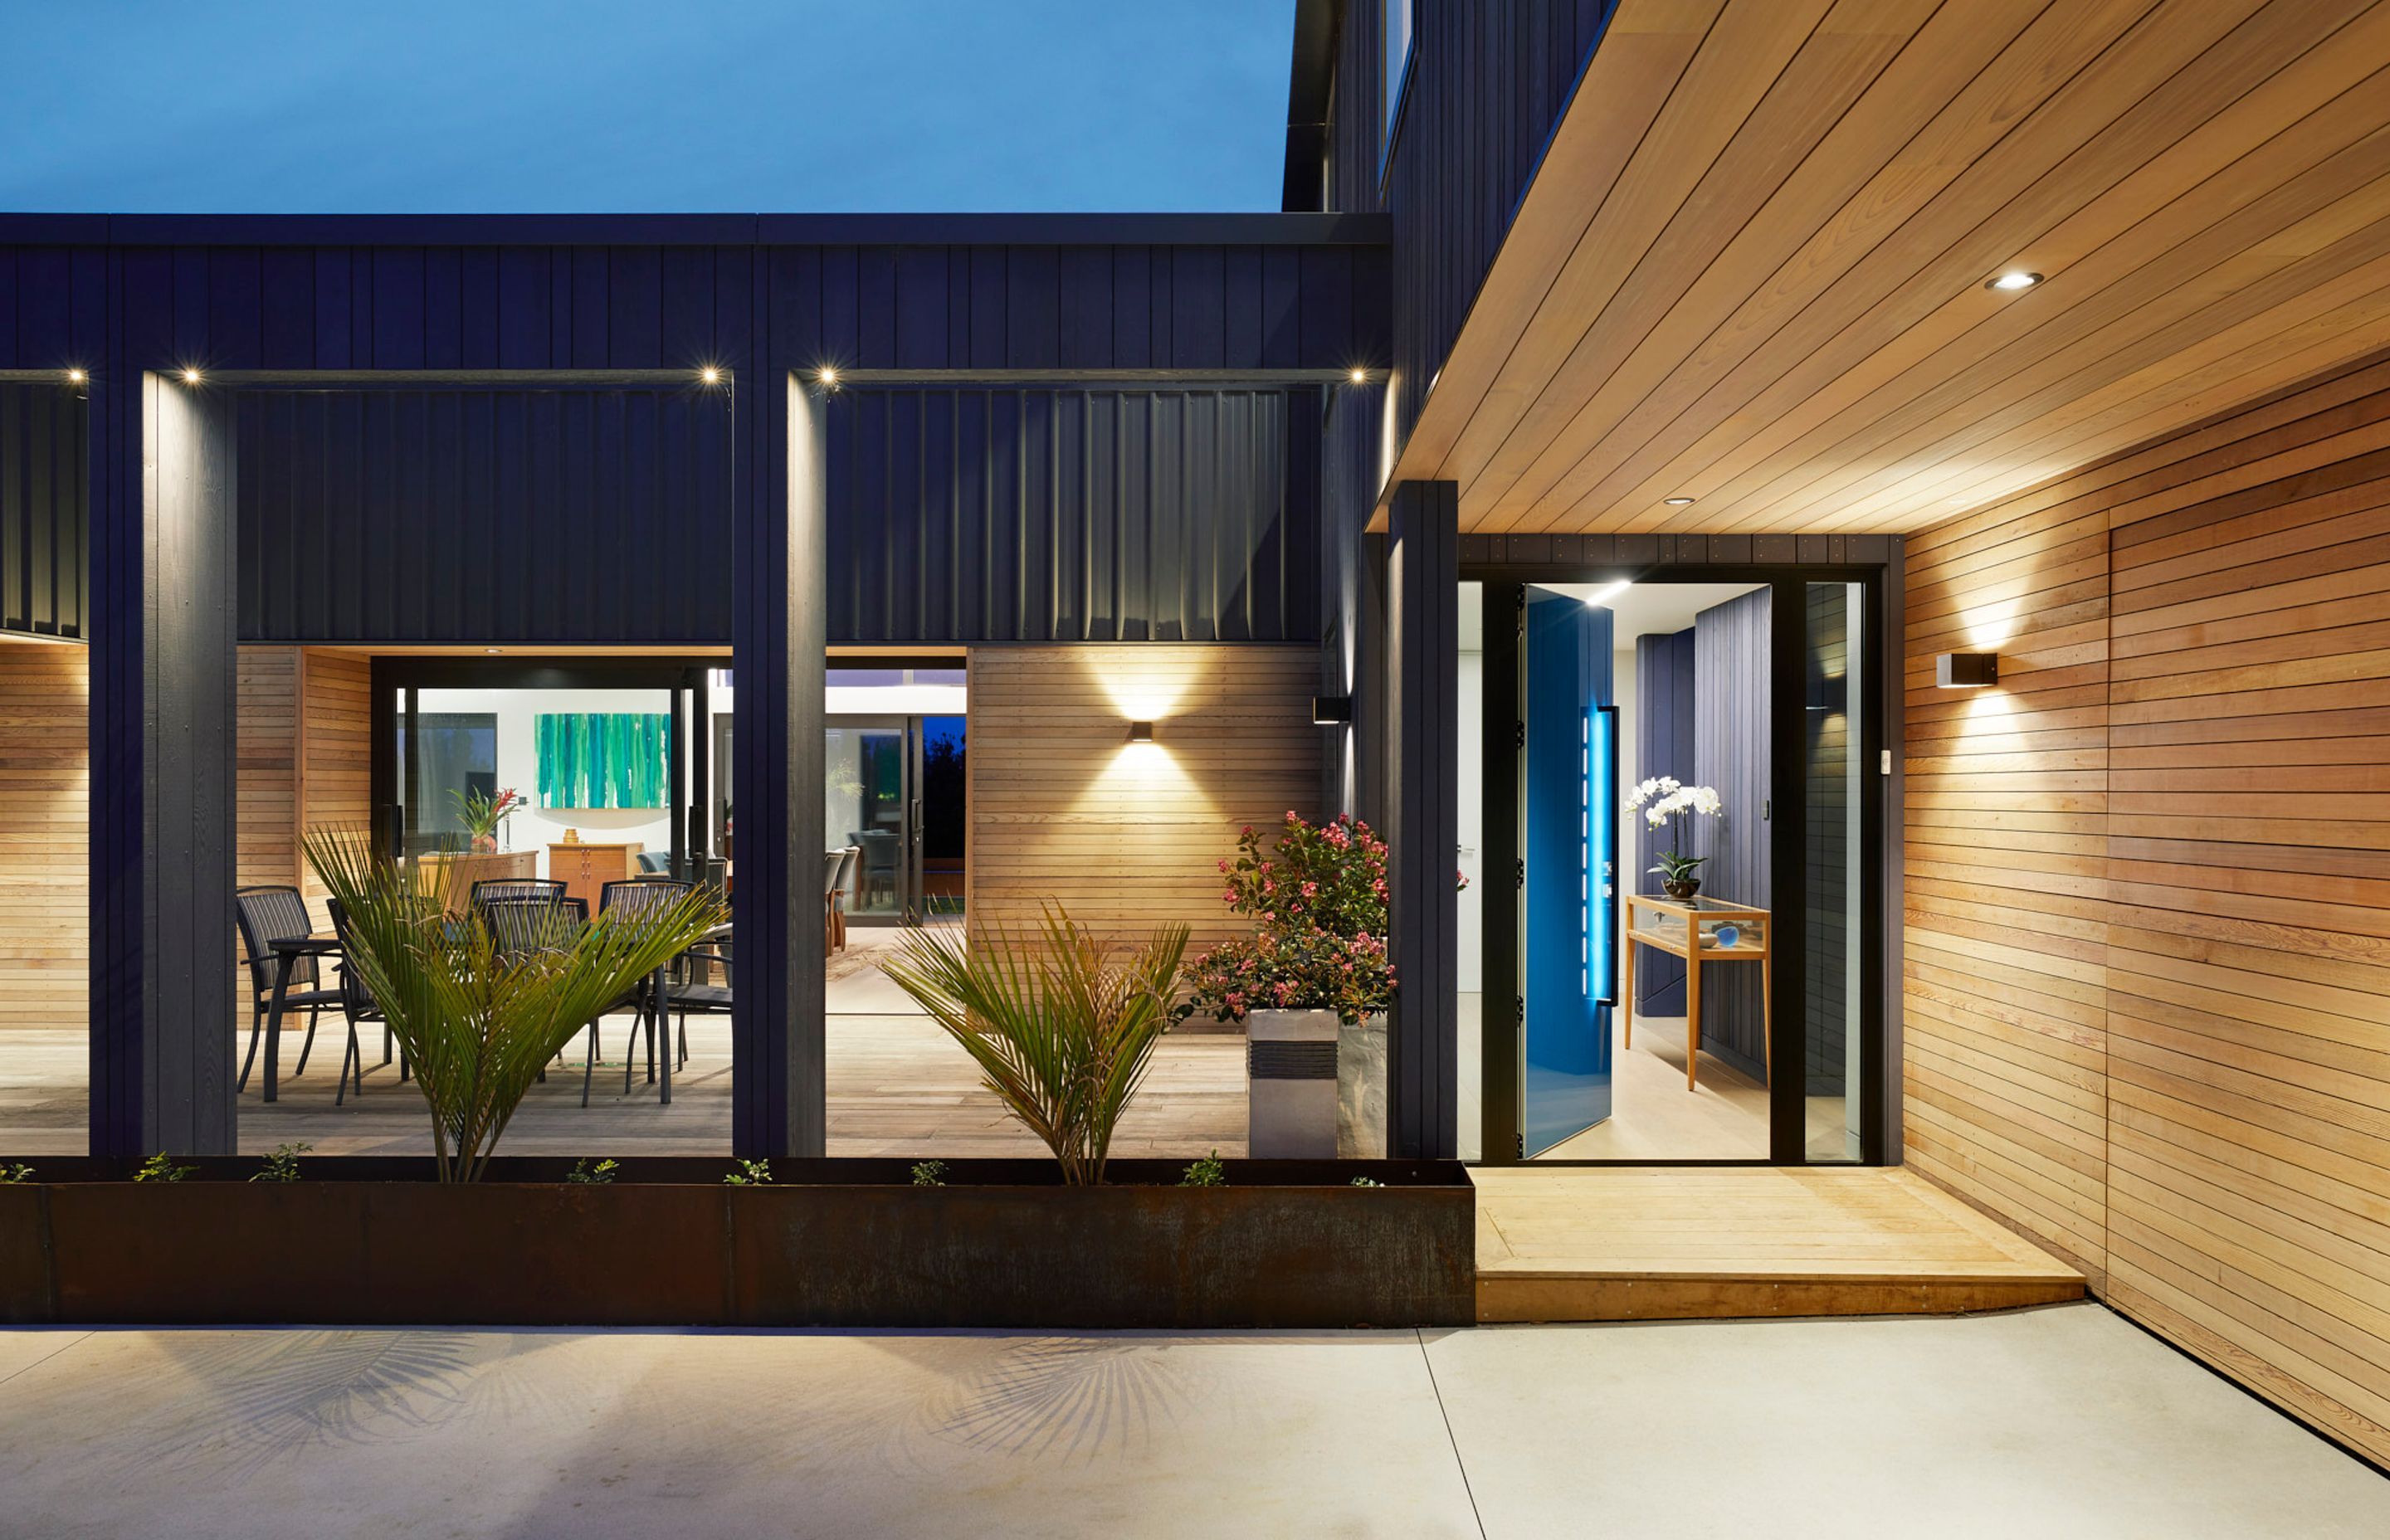 The attention to detail on the exterior cladding sees continuous lines and flush mountings such as the garage door’s seamless appearance against the side entry wall. Even the soffits are Cedar clad. Cedar cladding has also been utilised for feature walls 